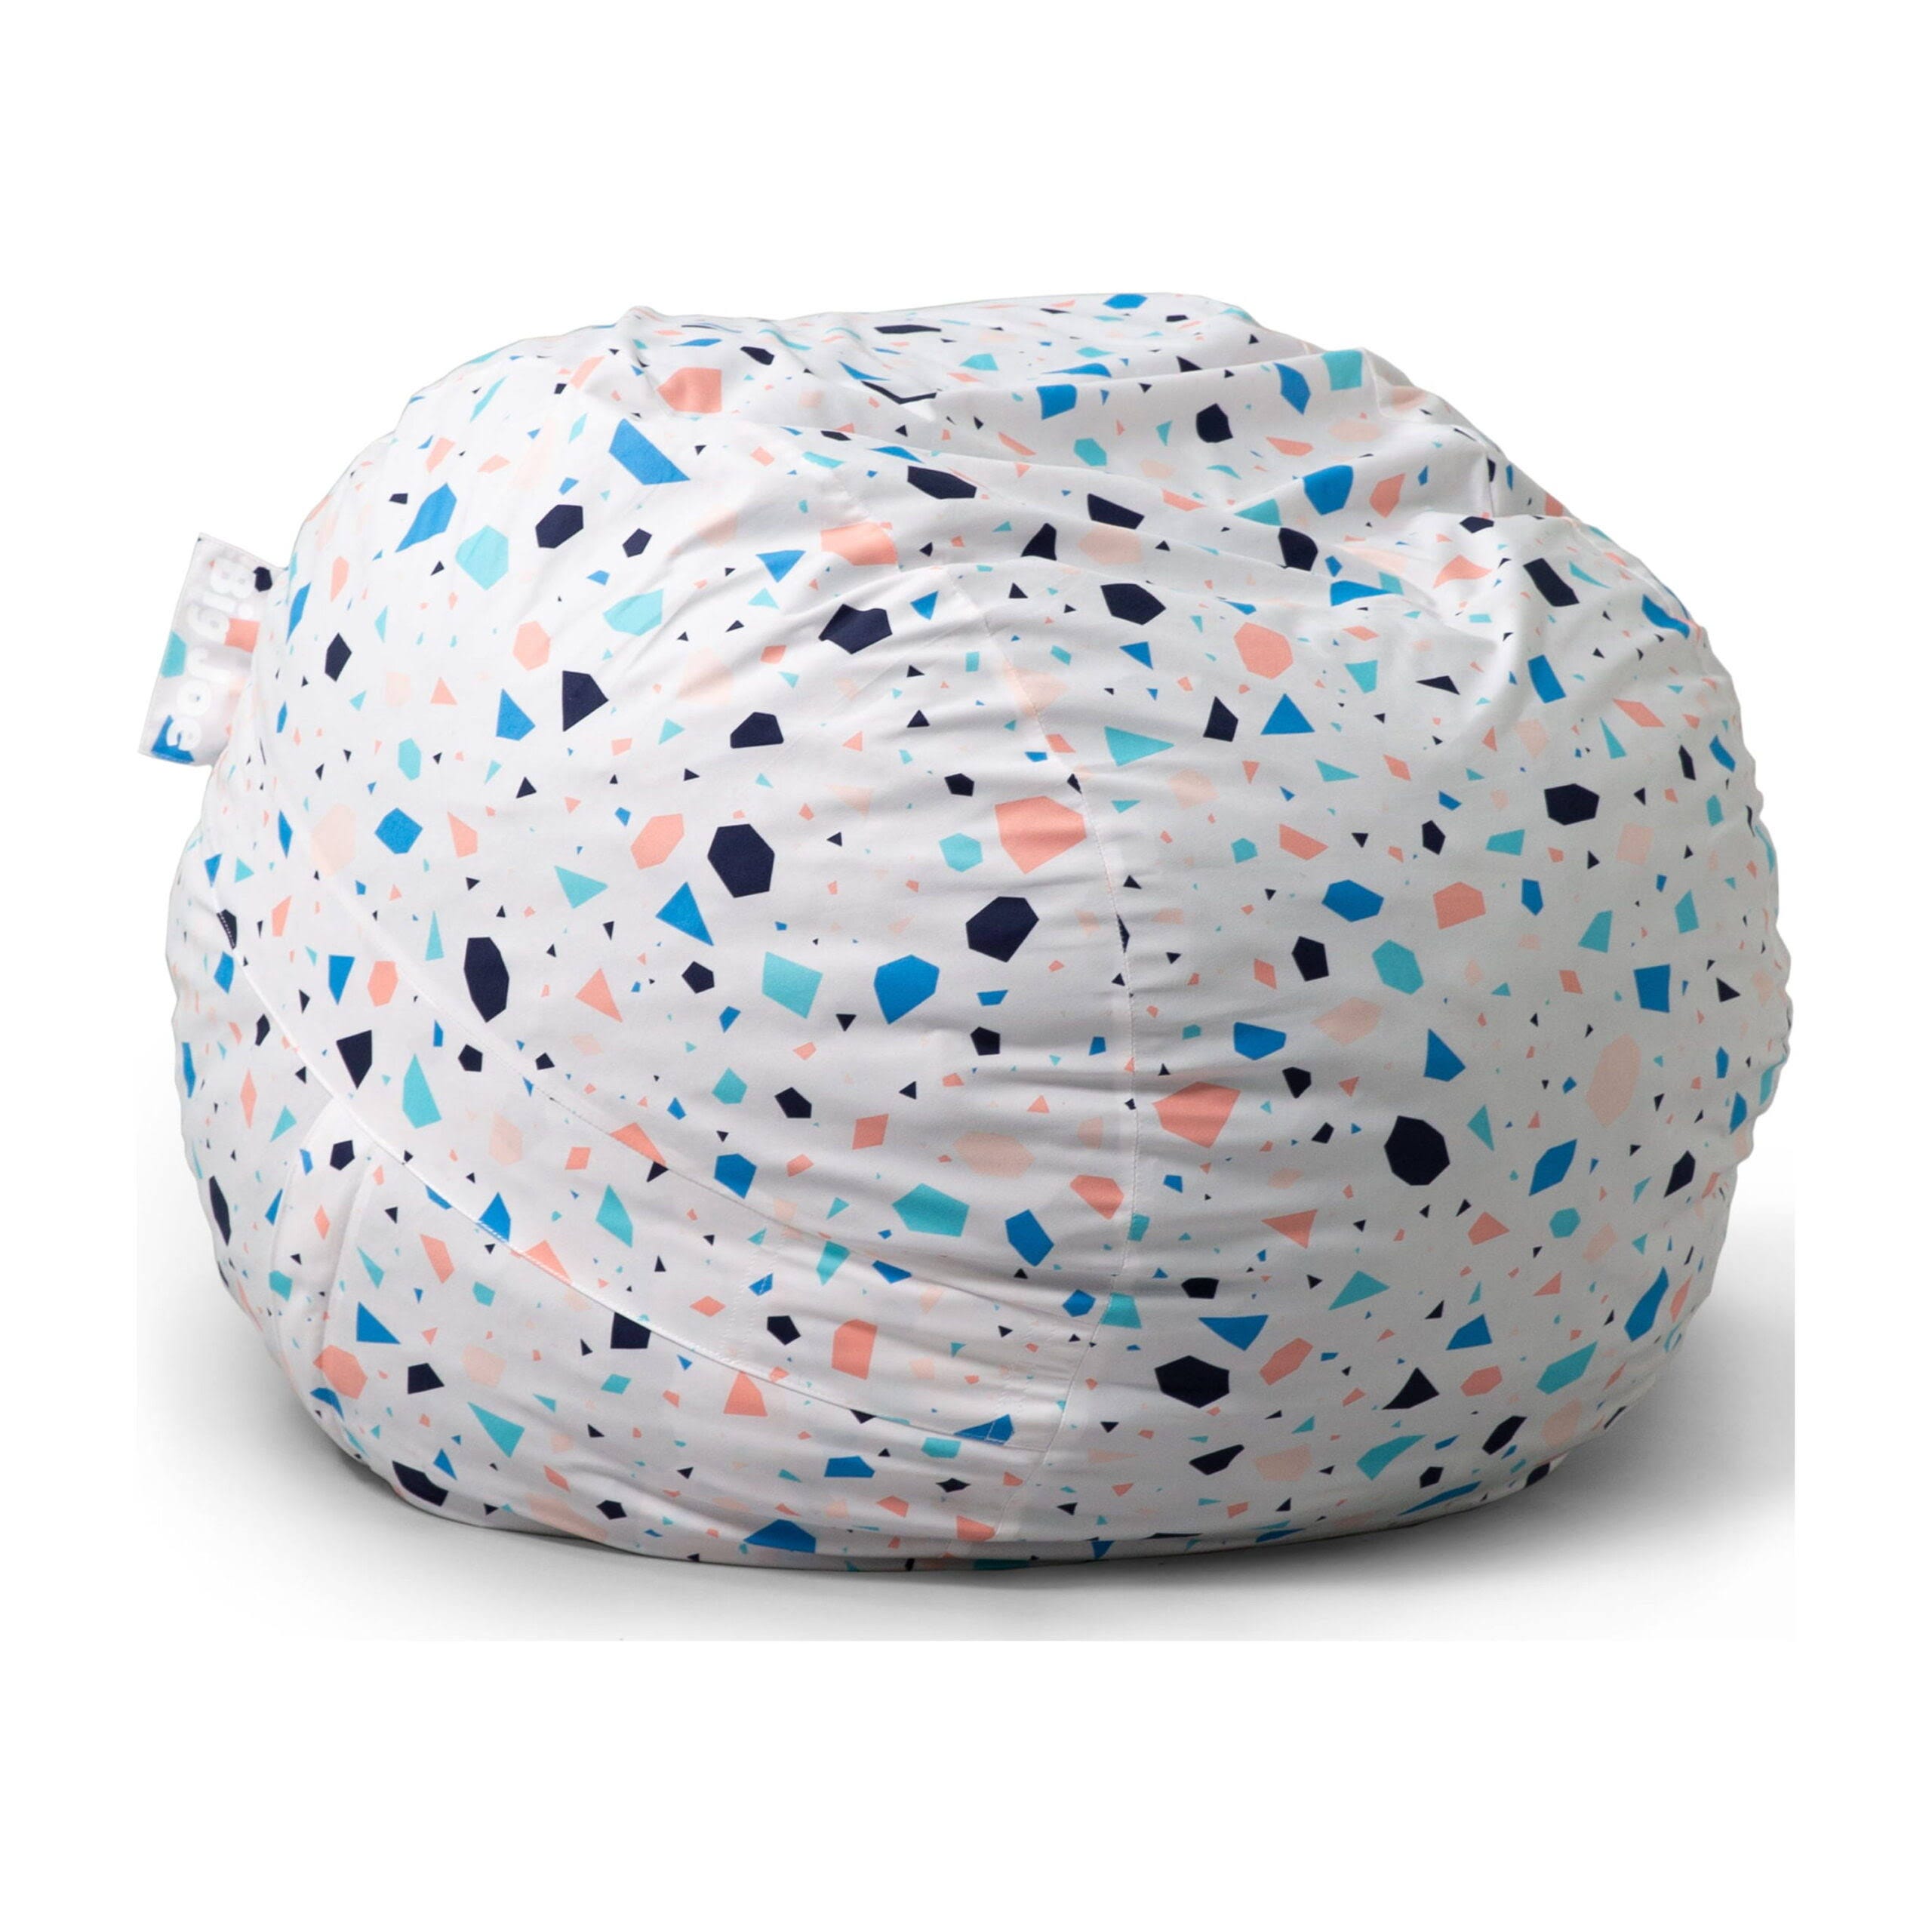 Soft and Cozy Medium-Sized Bean Bag Chair for Kids | Image